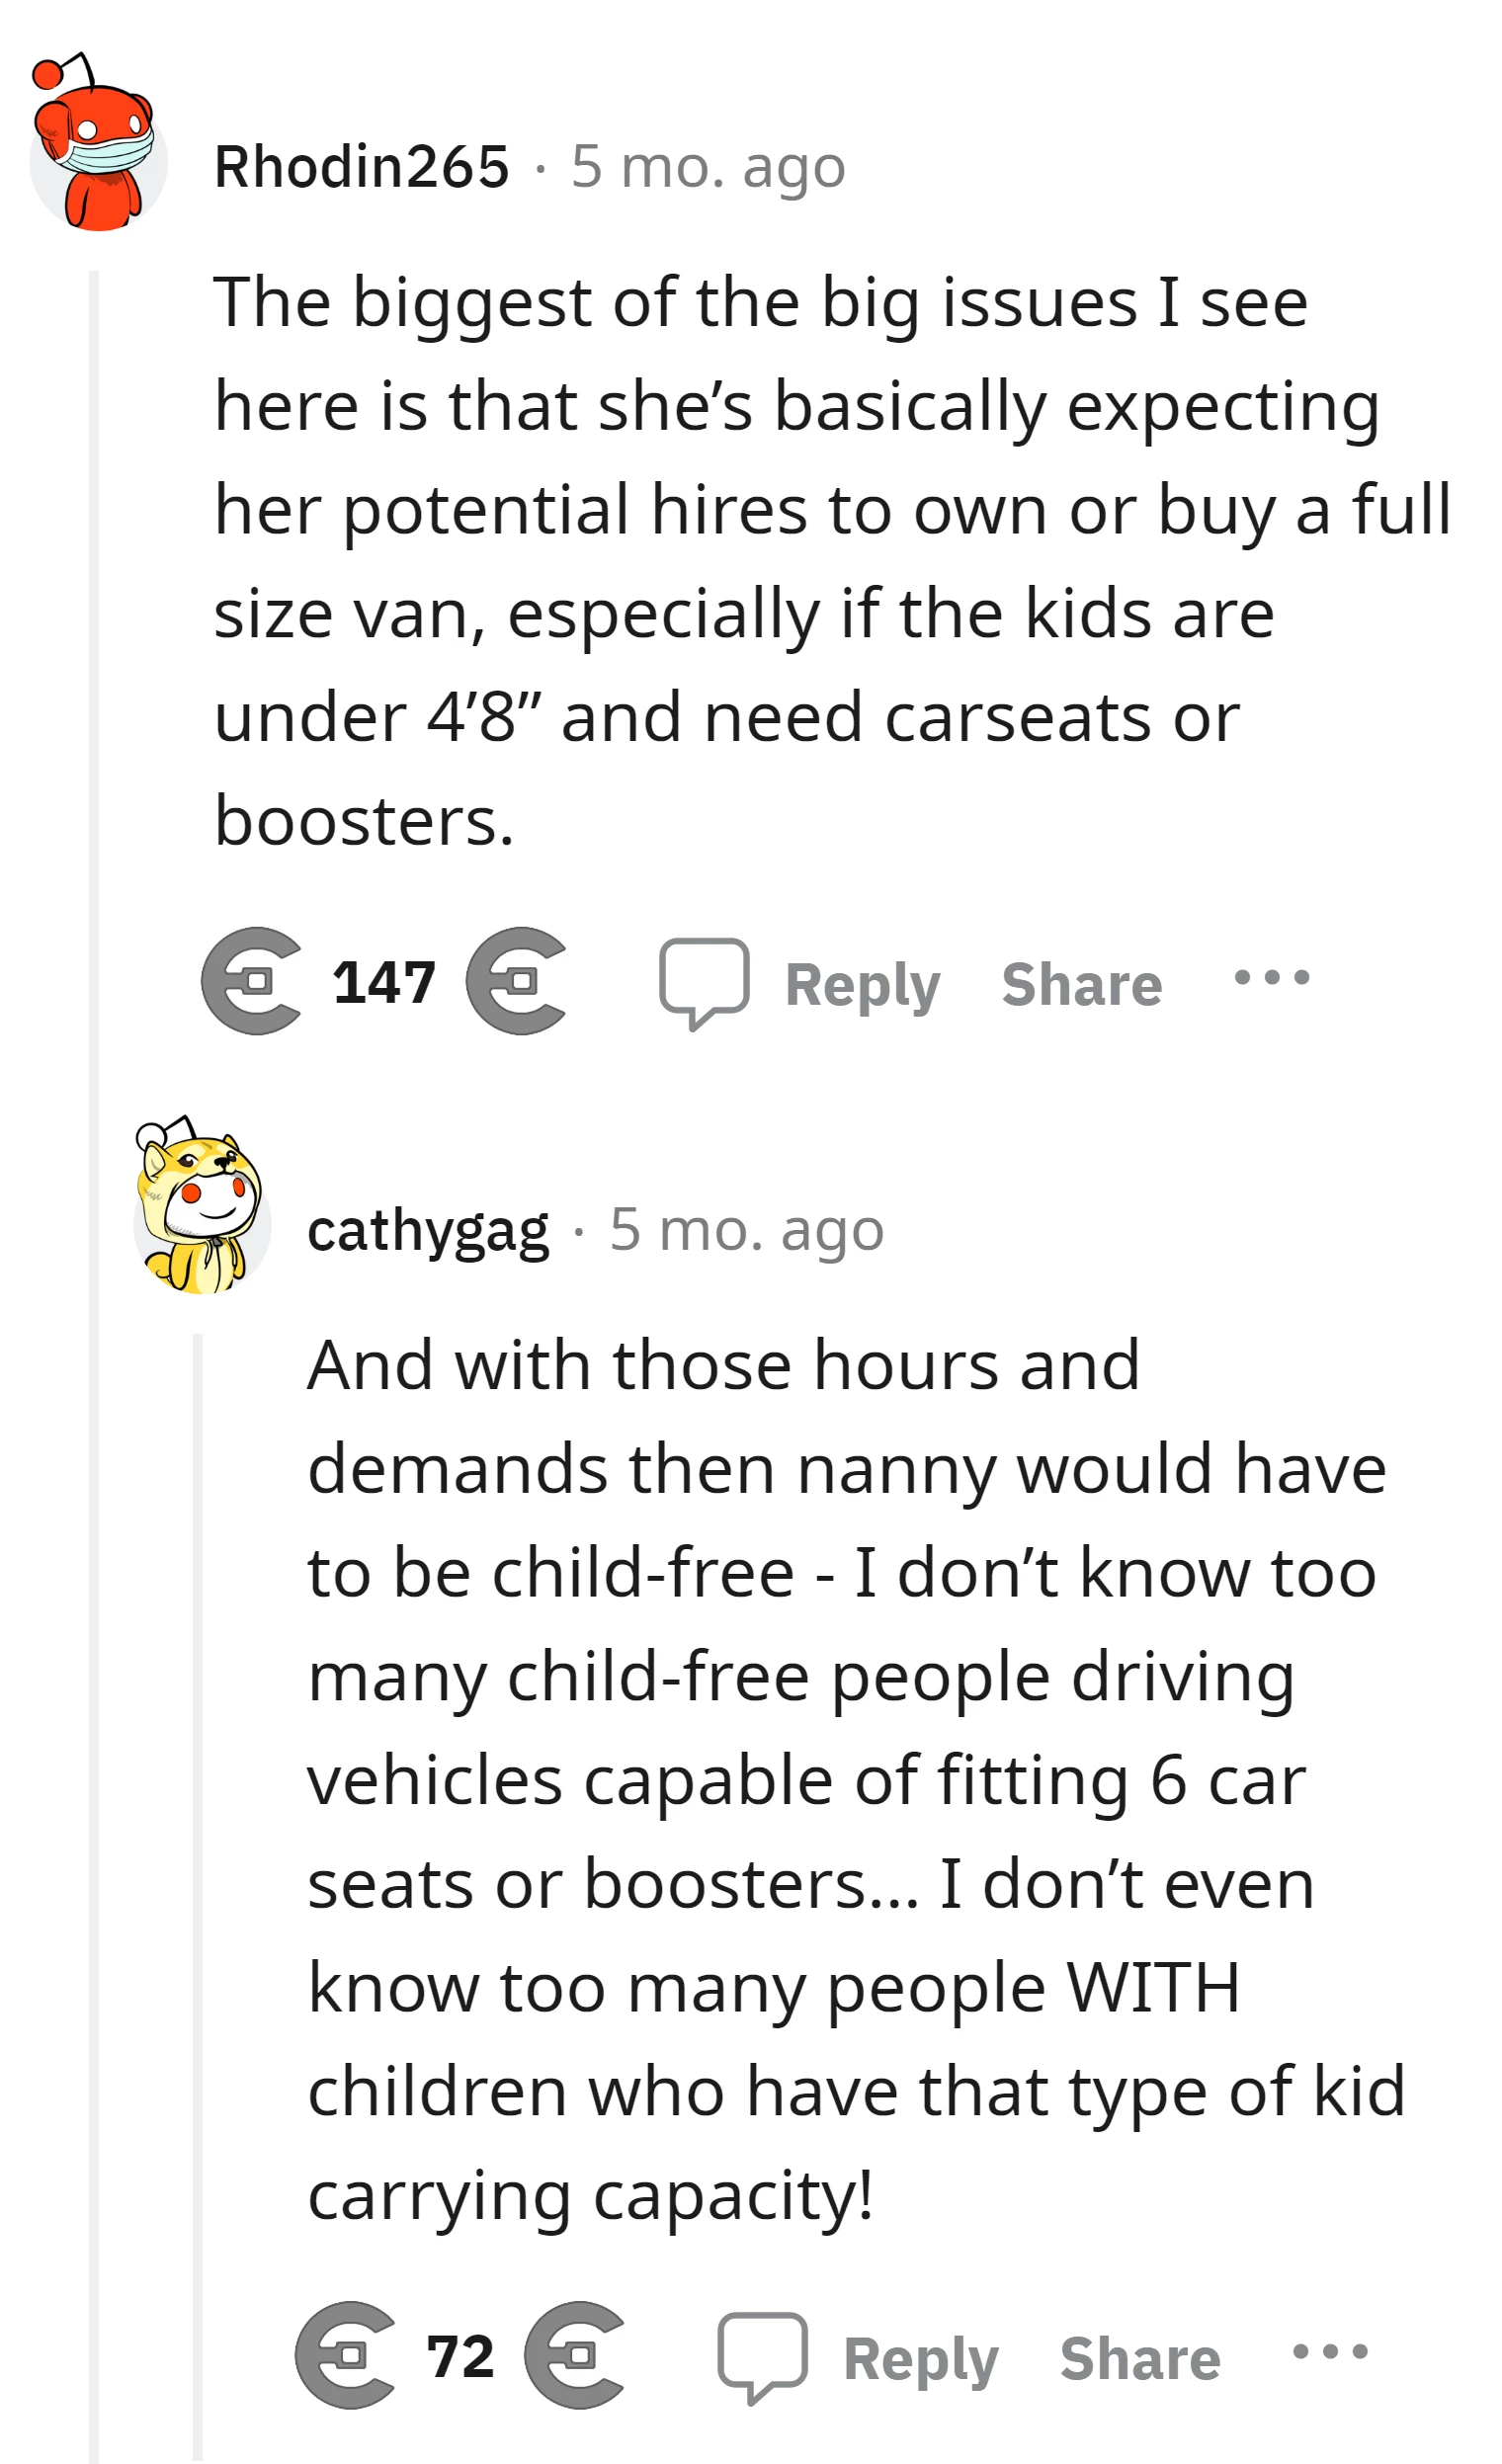 And of course the nanny will have to provide all car/booster seats